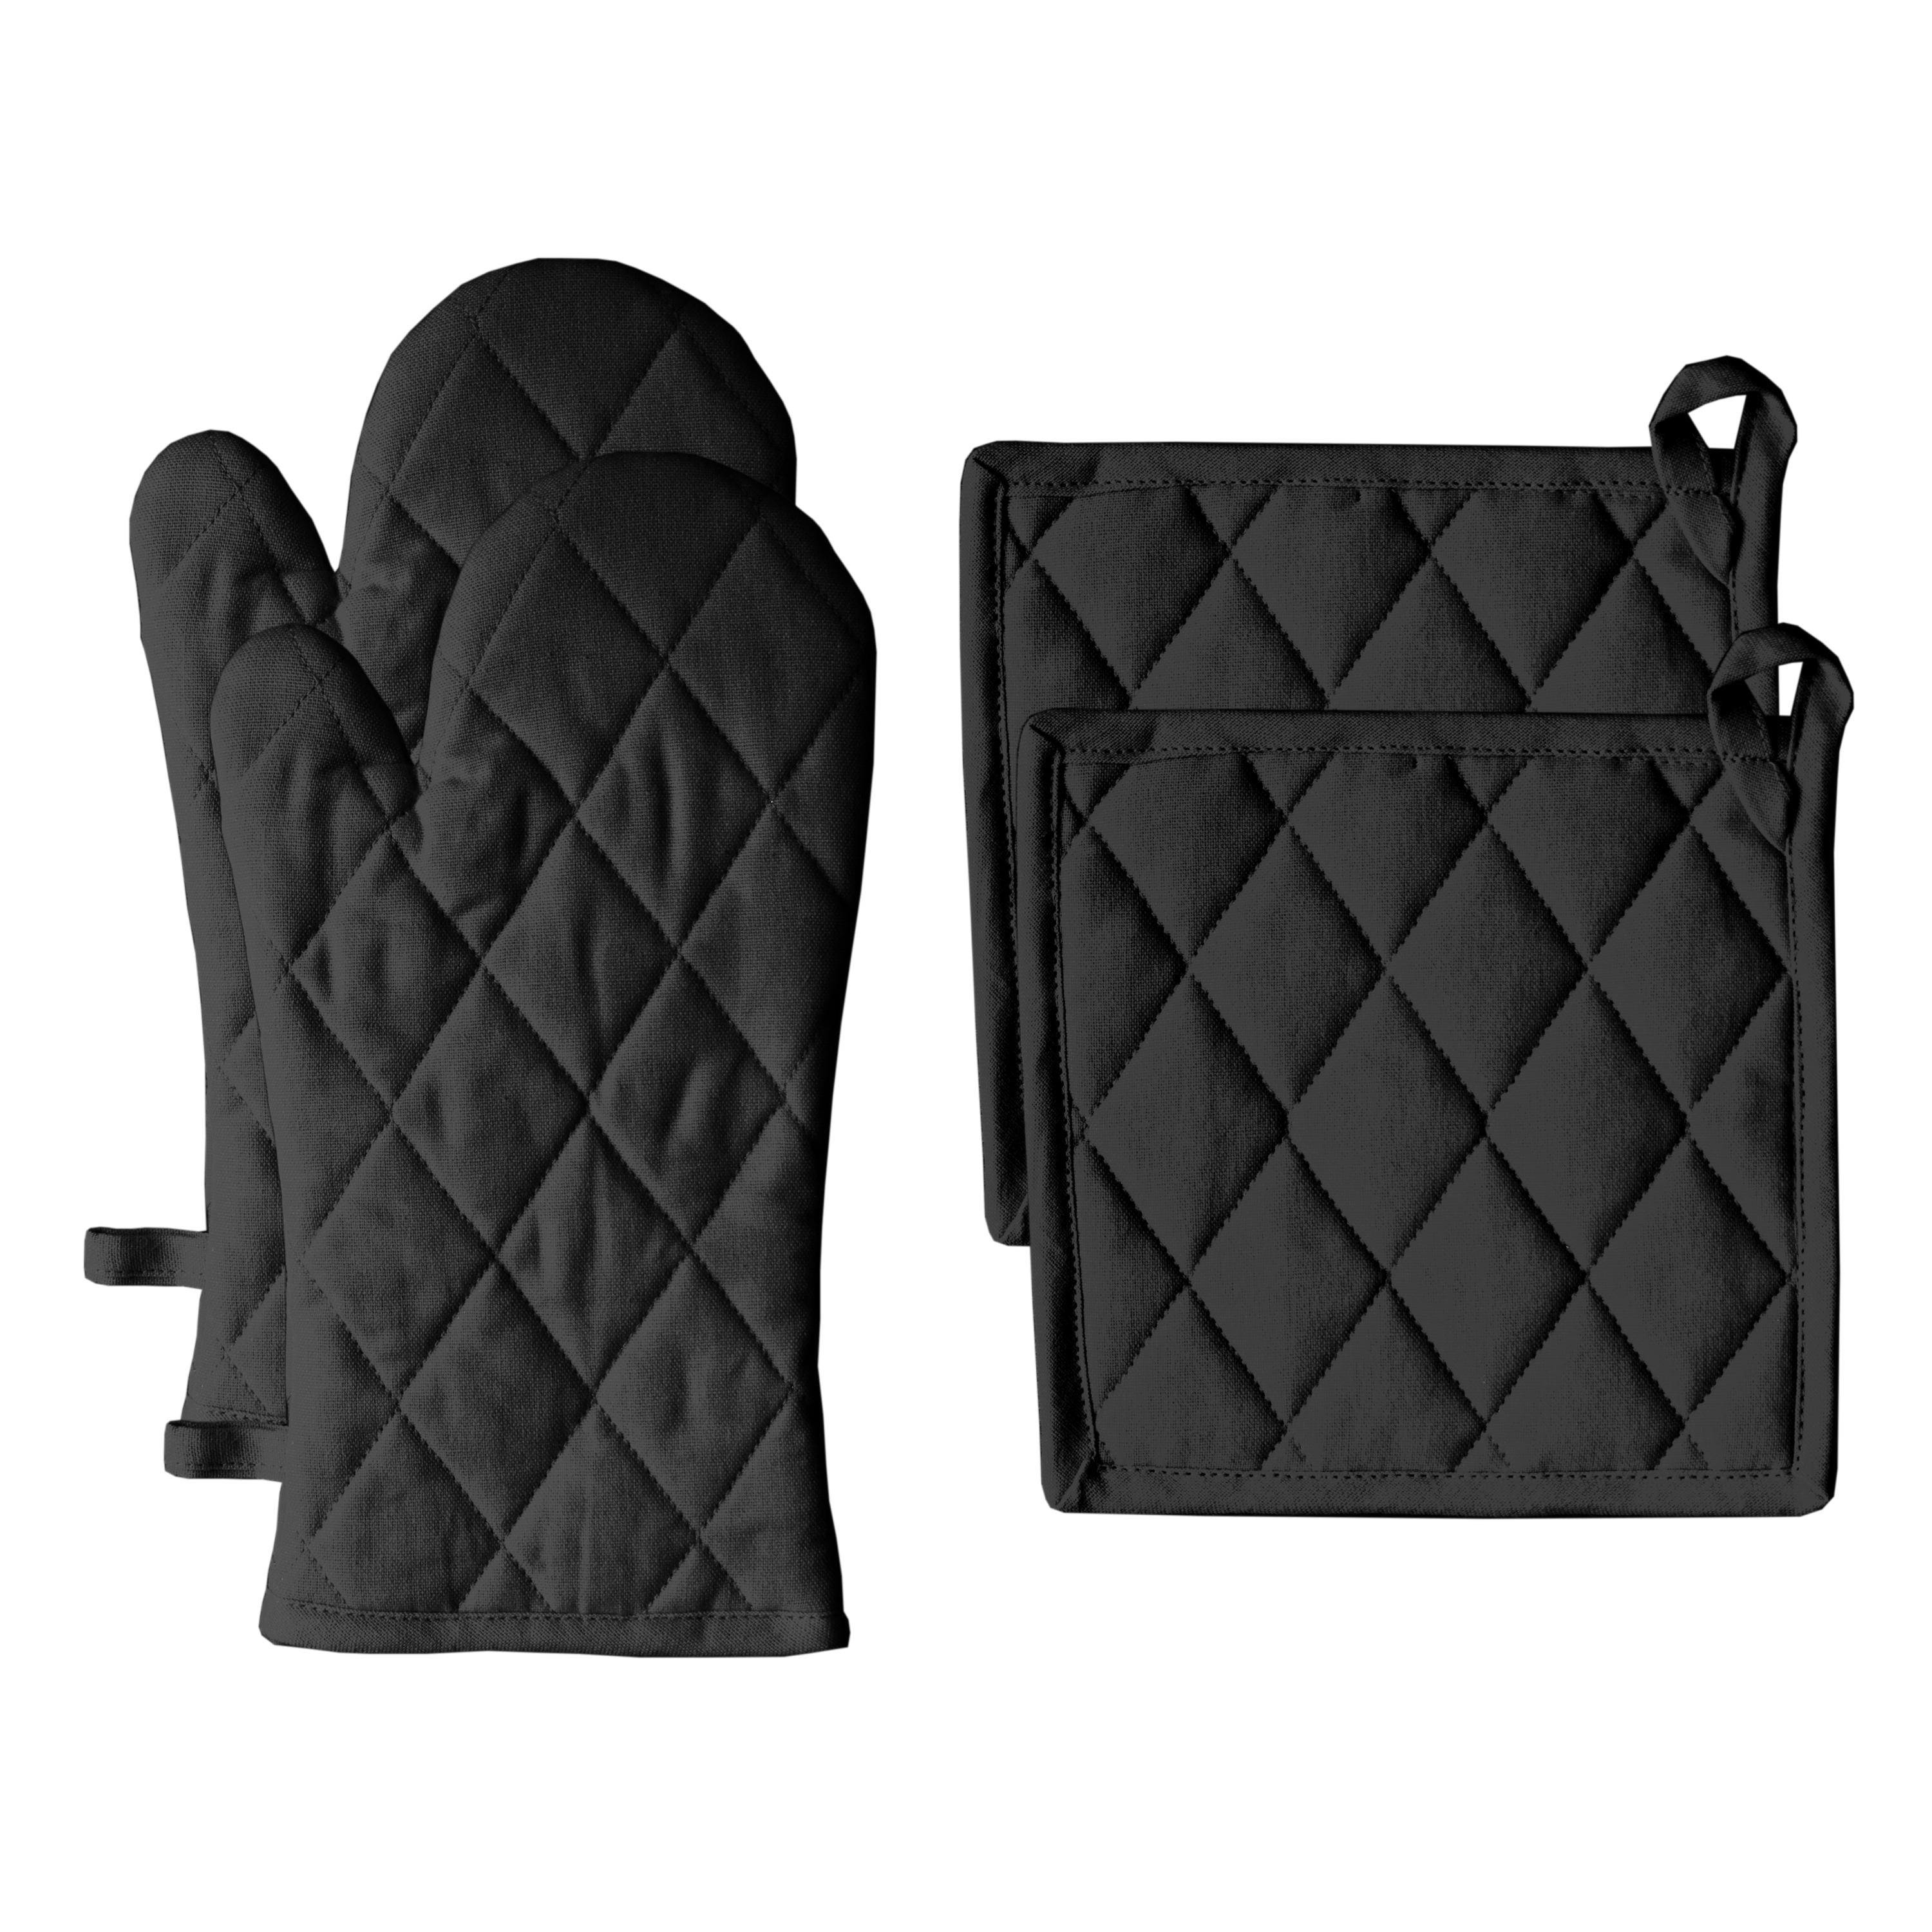 https://ak1.ostkcdn.com/images/products/is/images/direct/a7bbc79457af1a34567f88d91ffbb2d54b62d3da/Fabstyles-Solo-Waffle-Cotton-Oven-Mitt-%26-Pot-Holder-Set-of-4.jpg